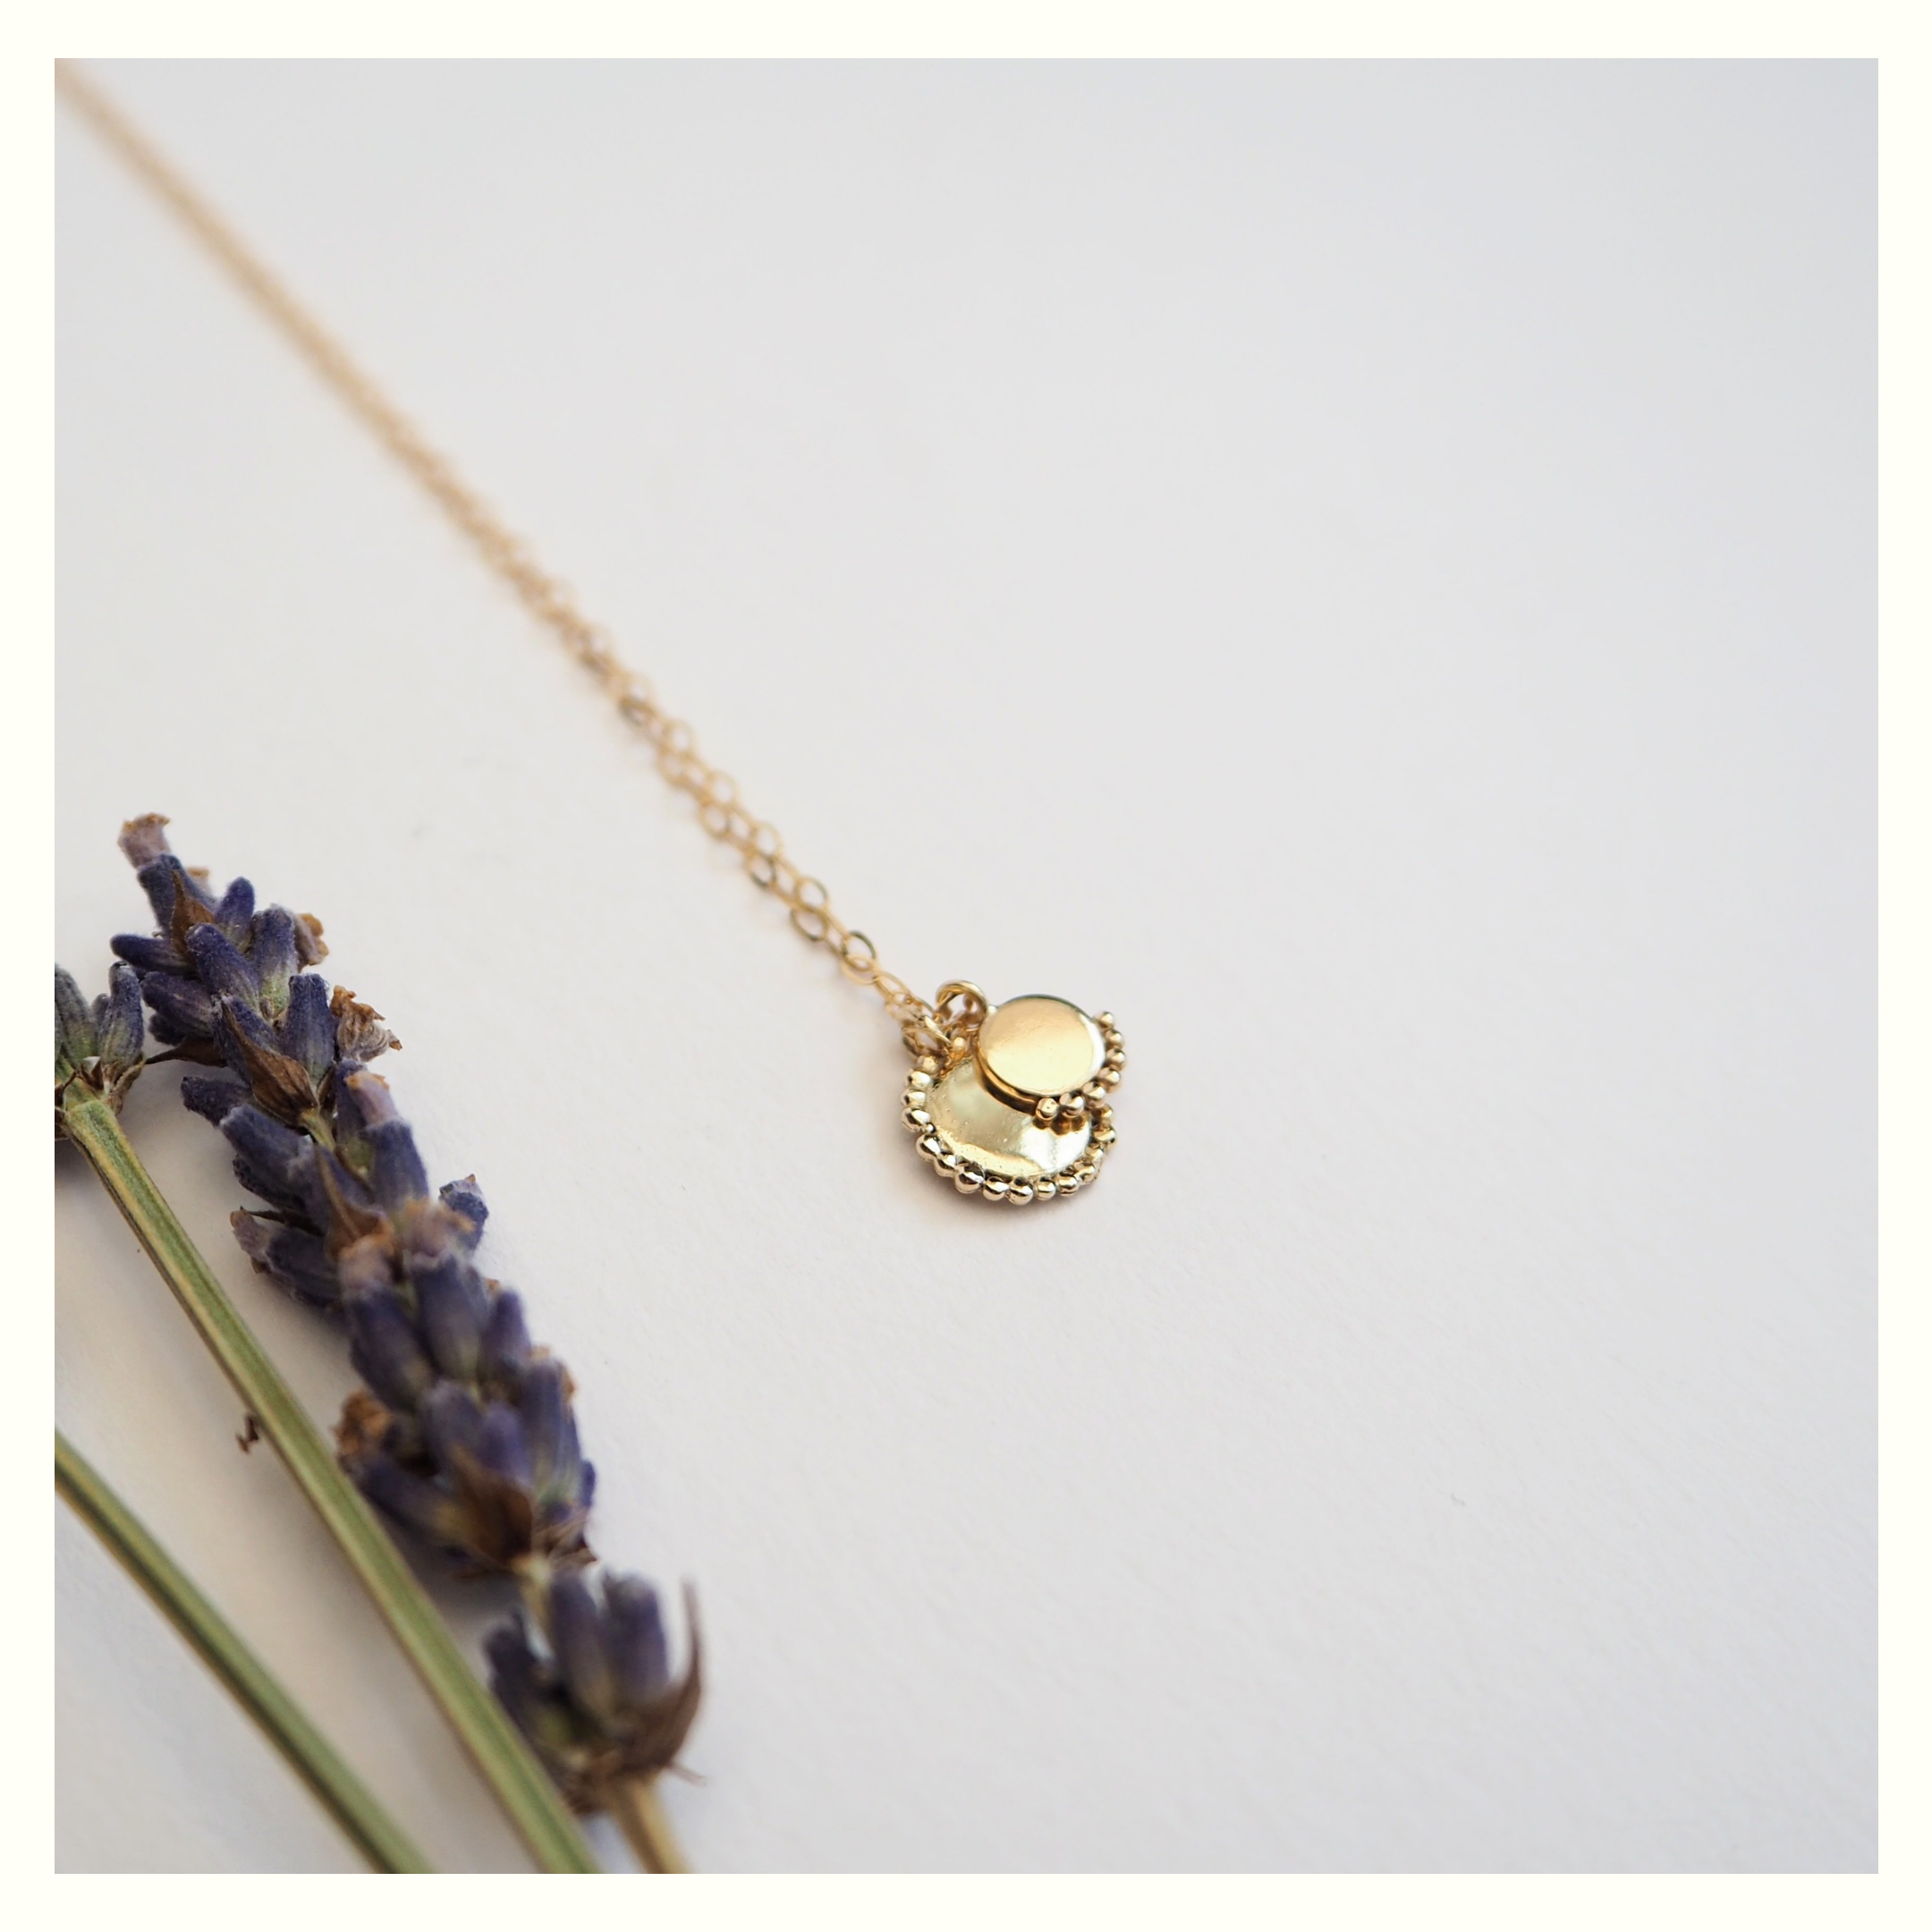 Sol Personalised initial Charm Necklace in Recycled Gold